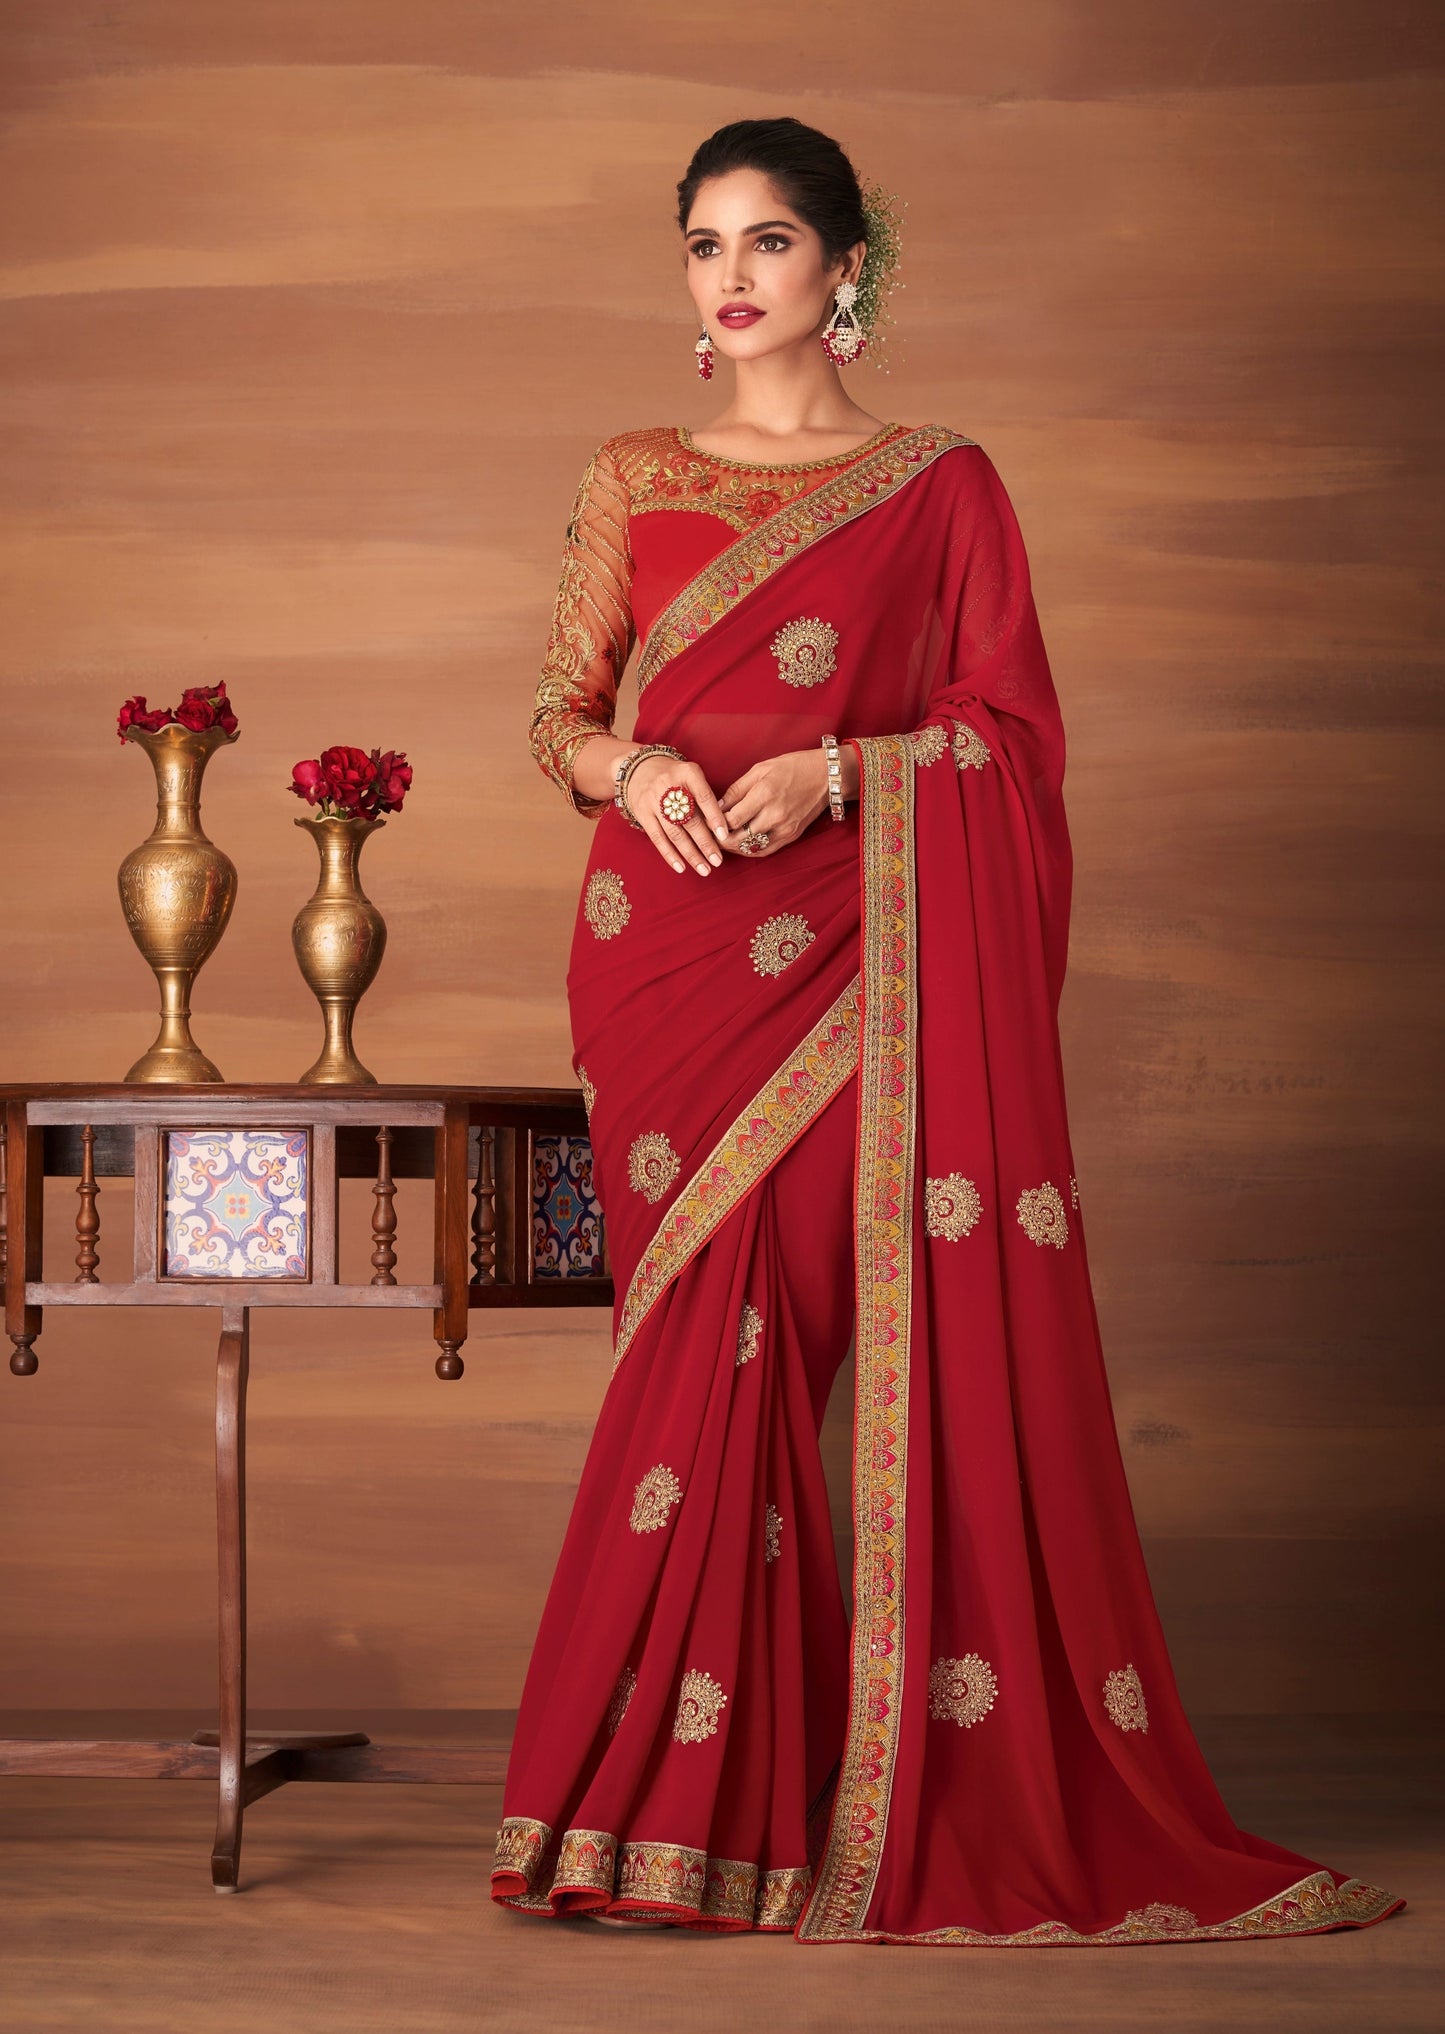 Gul Georgette Red and Gold Saree